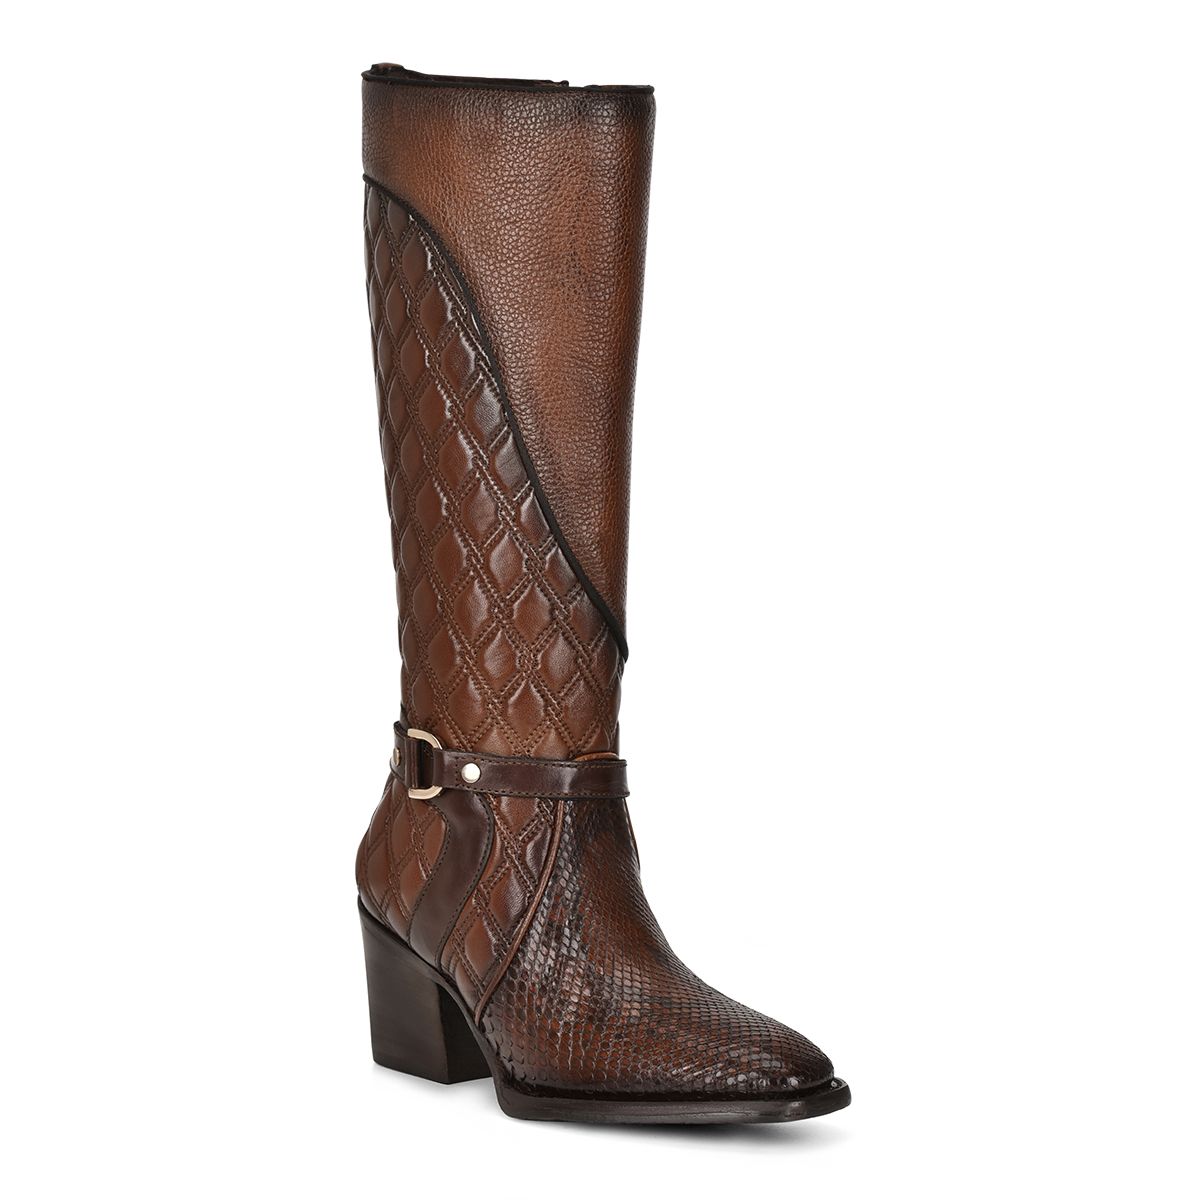 4P05PH - Cuadra brown western cowgirl python skin strapped boots for women-Kuet.us